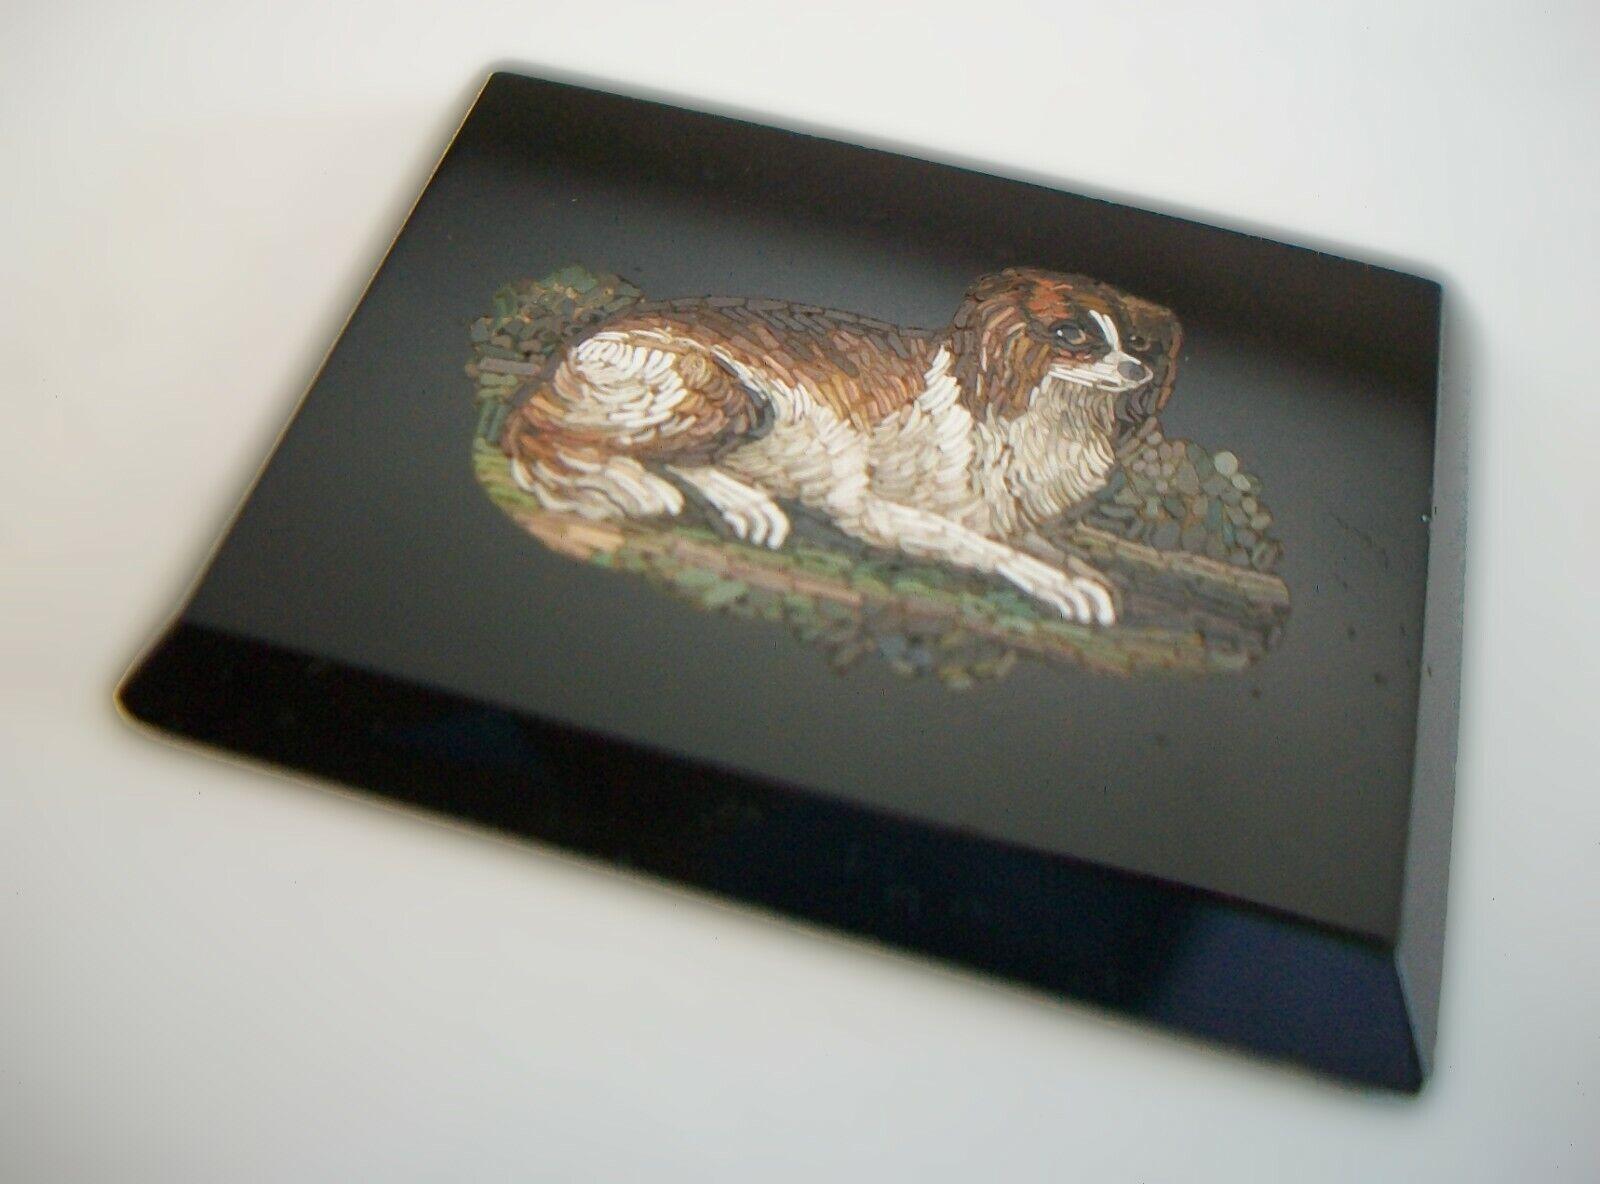 19th Century Antique Grand Tour 'King Charles Spaniel' Micro Mosaic Plaque, Italy, C.1850 For Sale